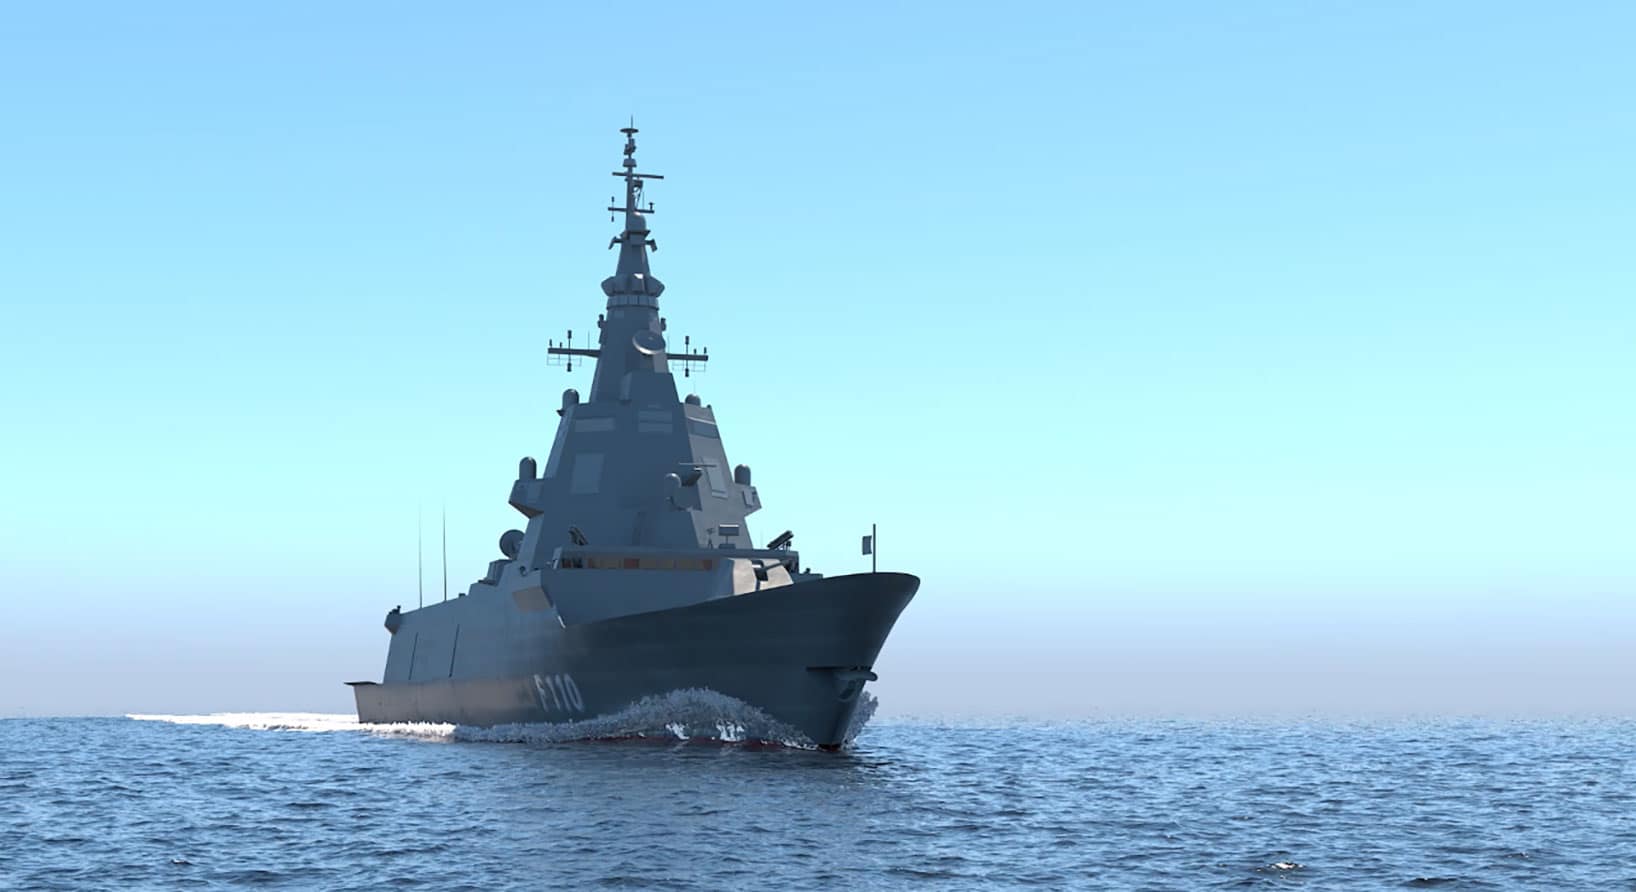 An artist's rendering of the F-110 frigate. The ship is painted gray, and is seen sailing across blue waters. The background is a clear blue sky.